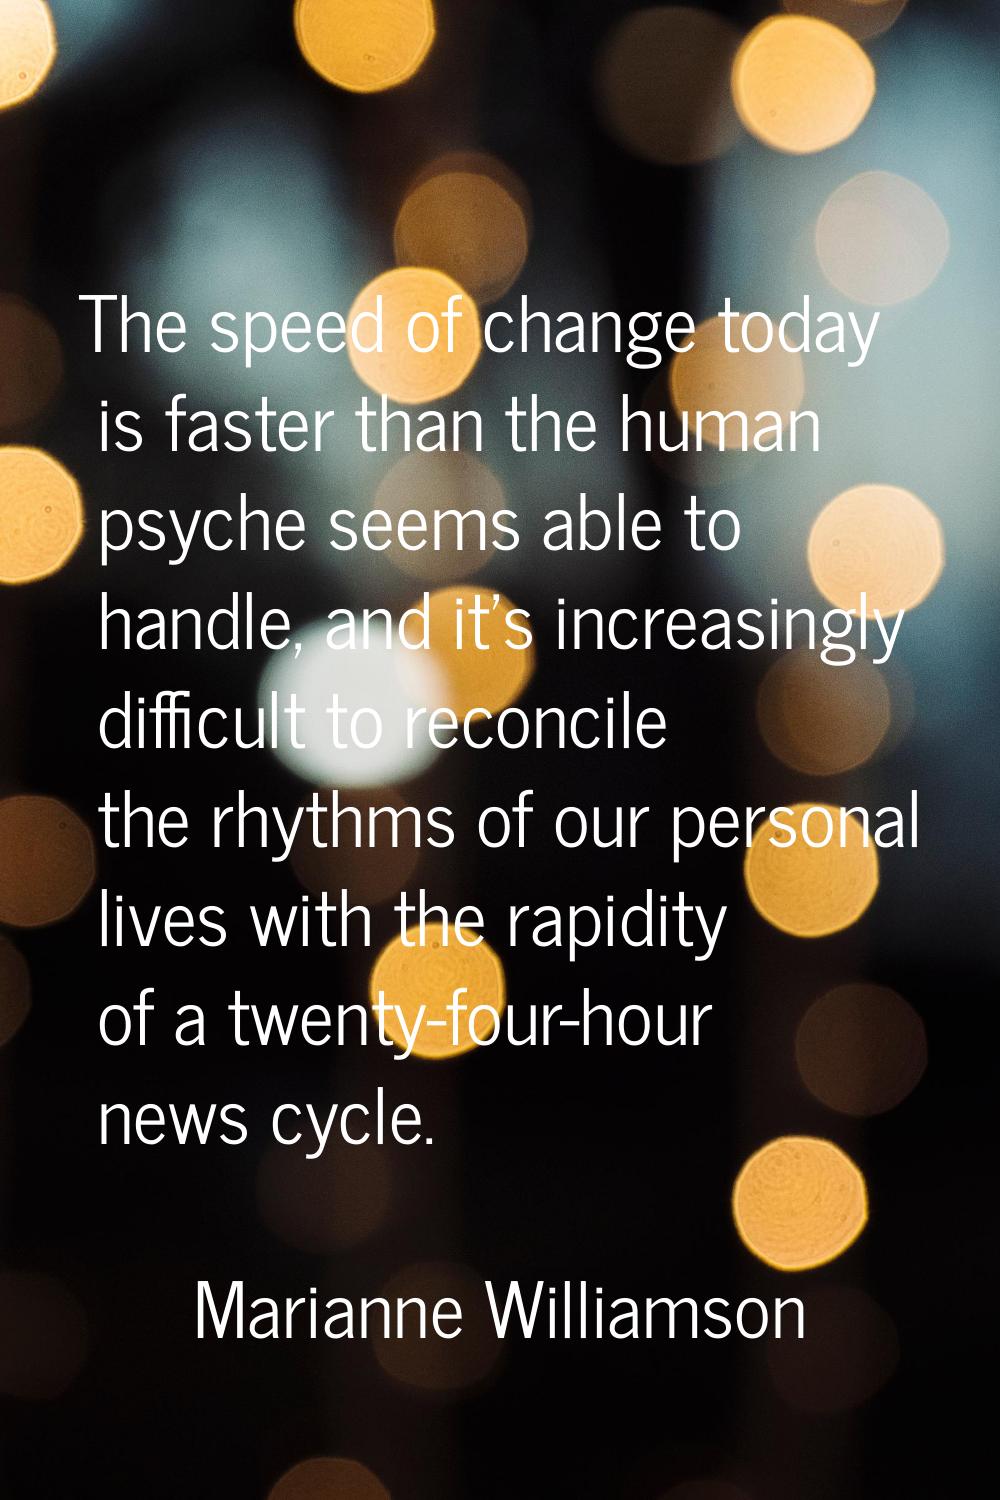 The speed of change today is faster than the human psyche seems able to handle, and it's increasing